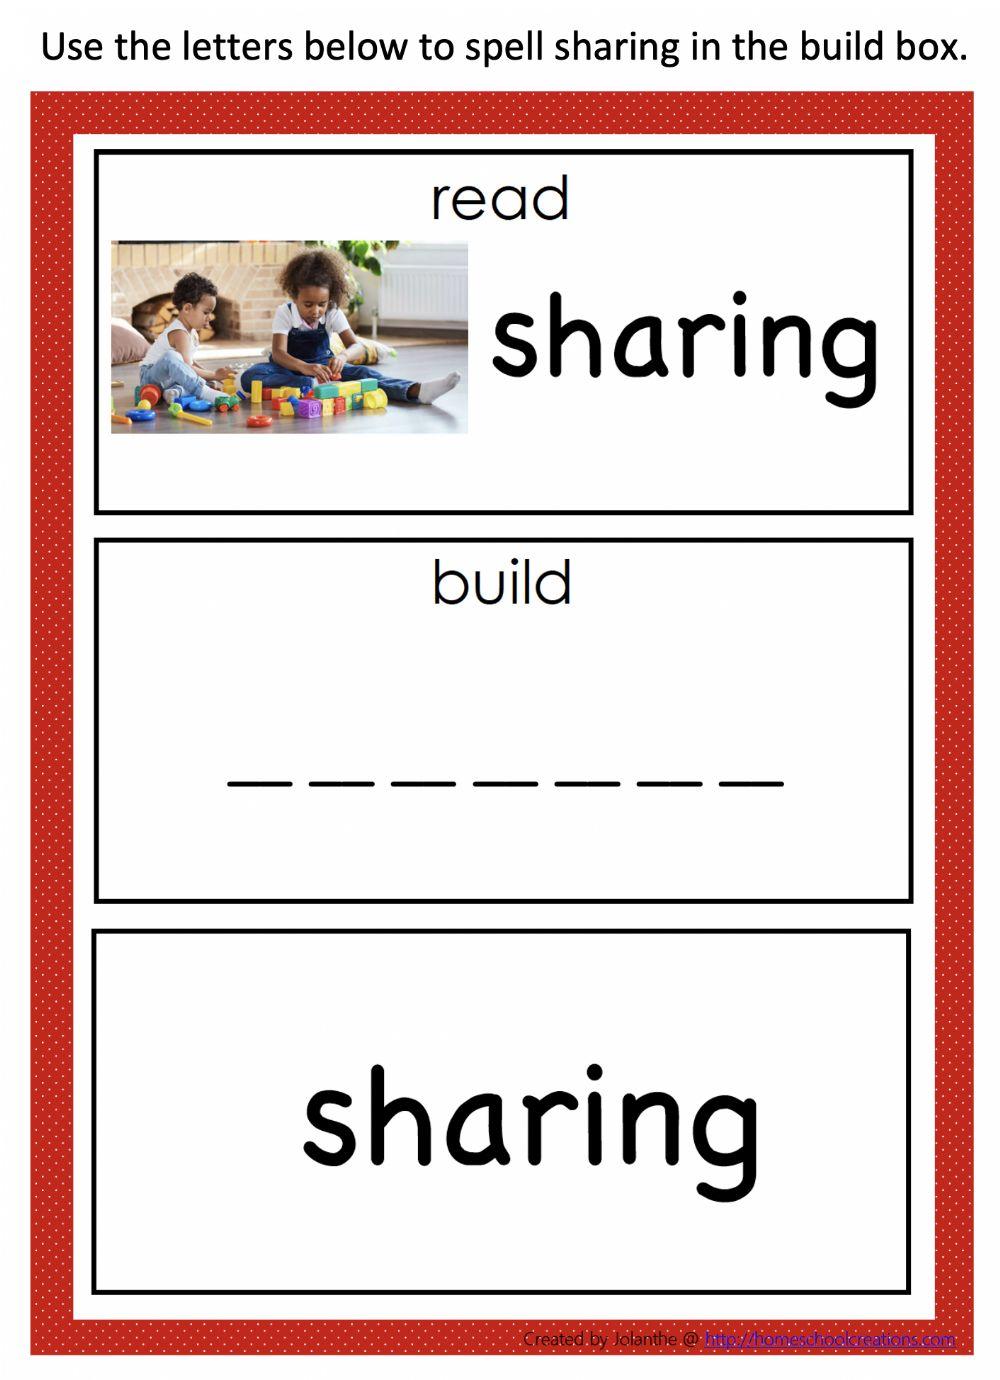 I cAn Read and Build the word sharing